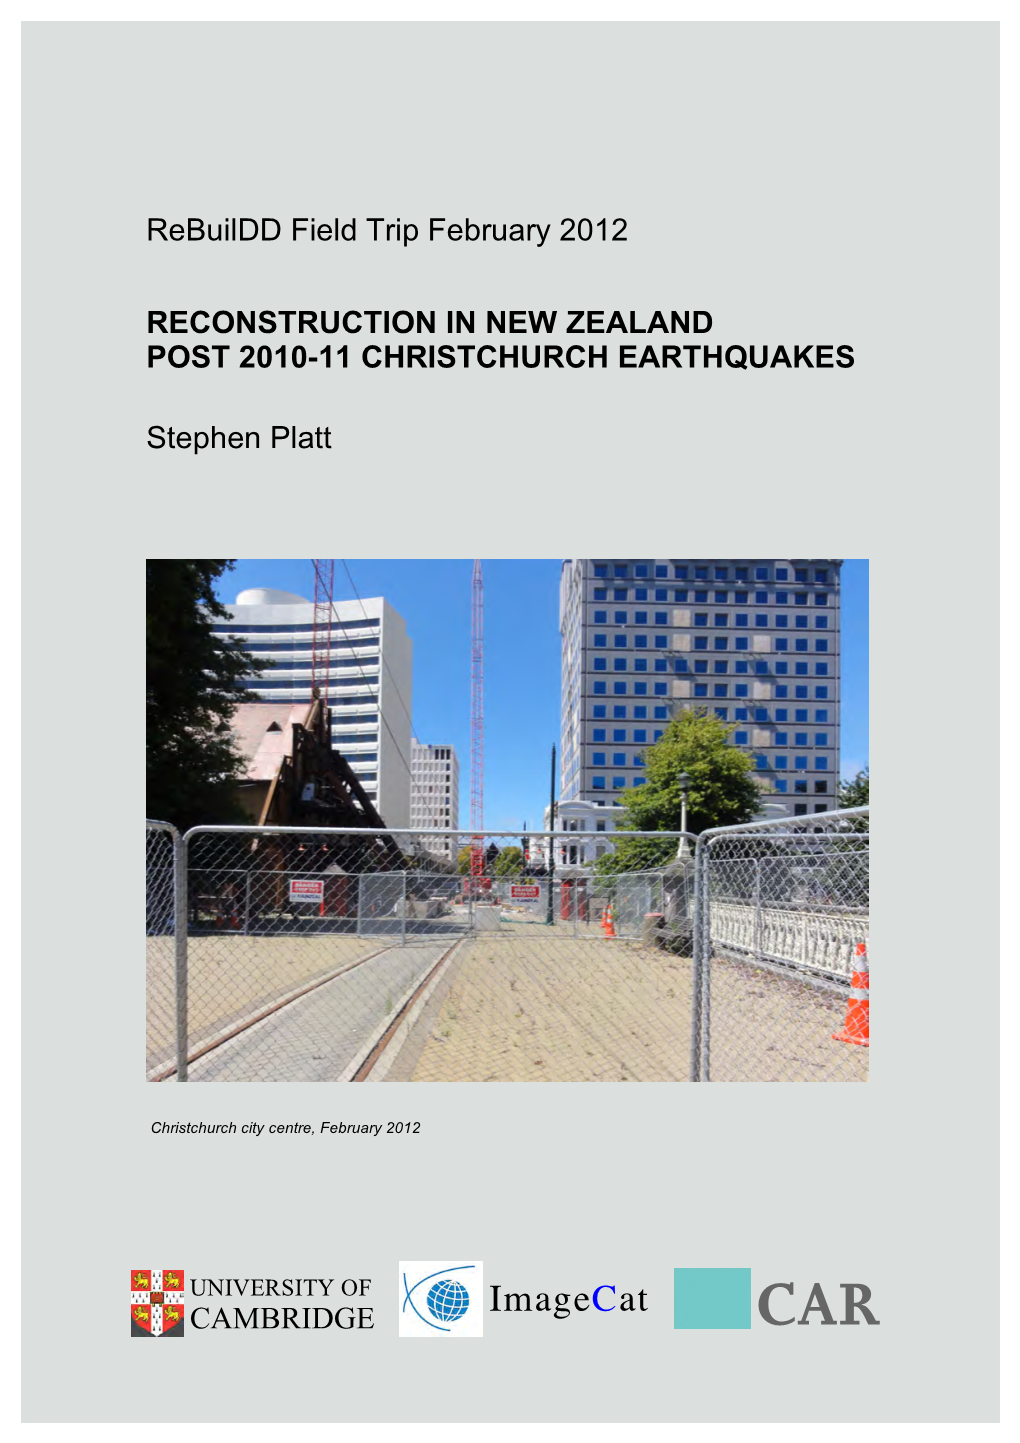 Reconstruction in New Zealand Post 2010-11 Christchurch Earthquakes